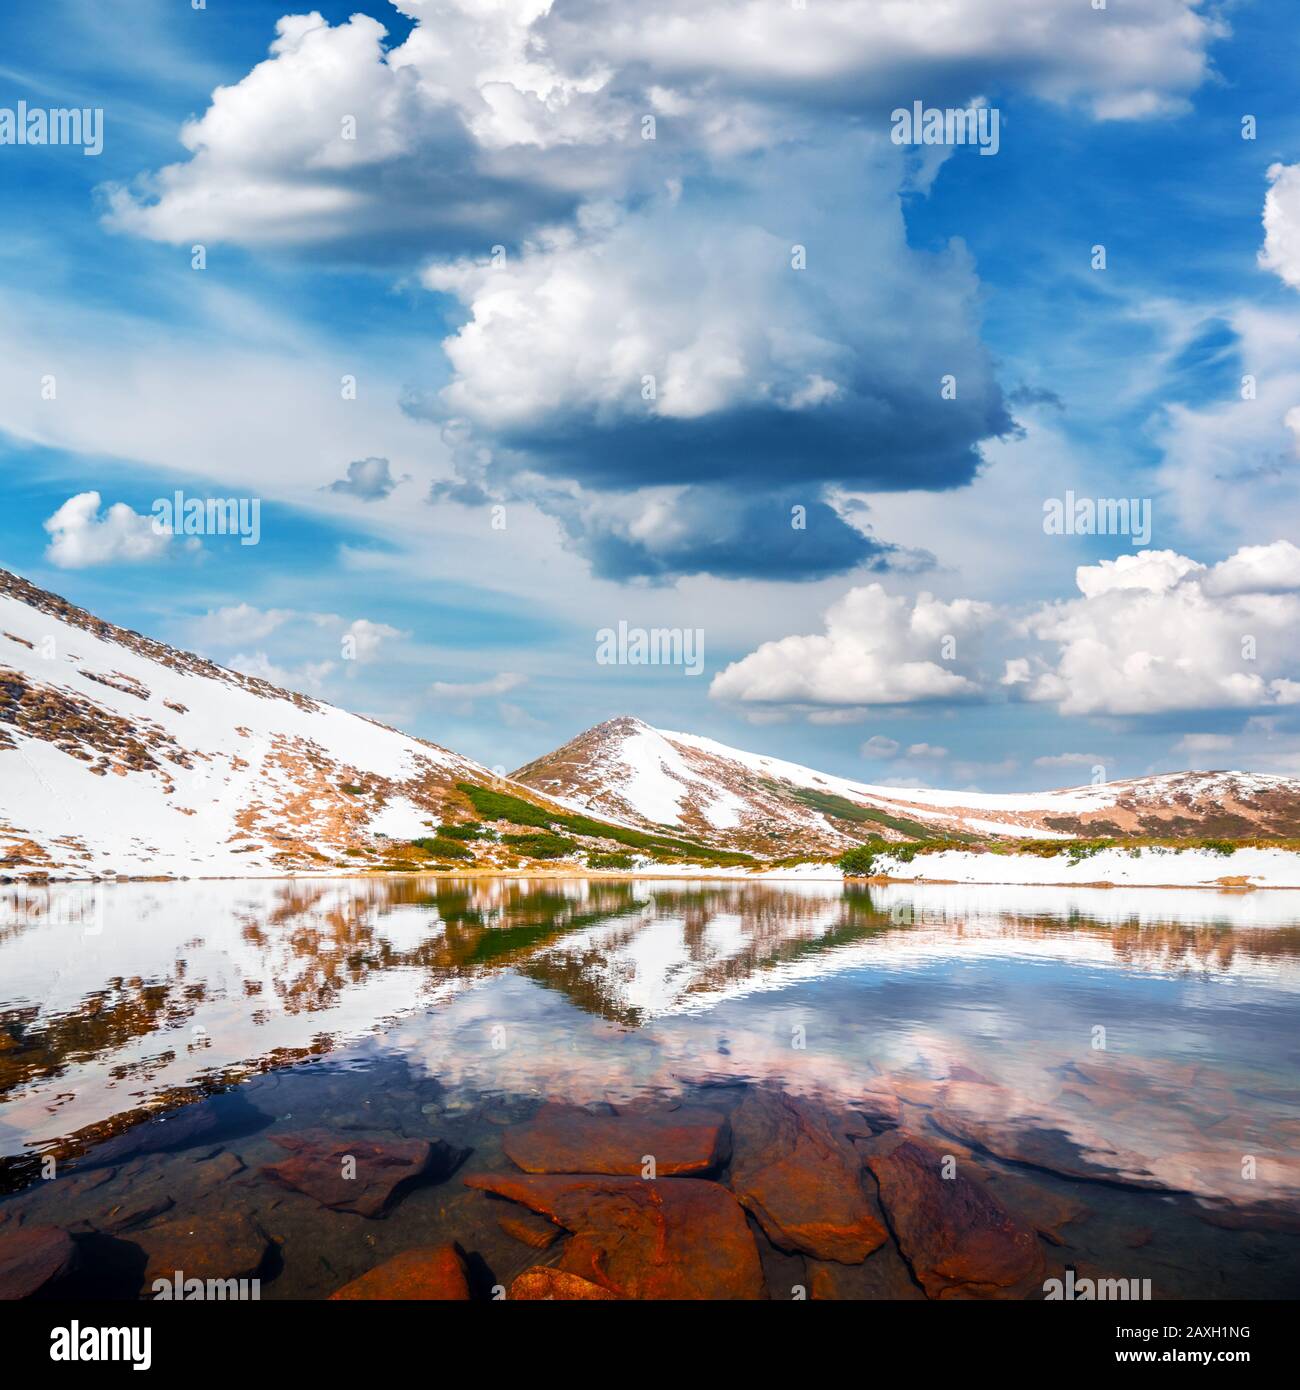 Gorgeous landscape with mountain lake and snowy hills under a blue cloudy sky. Mountains in spring time. Landscape photography Stock Photo